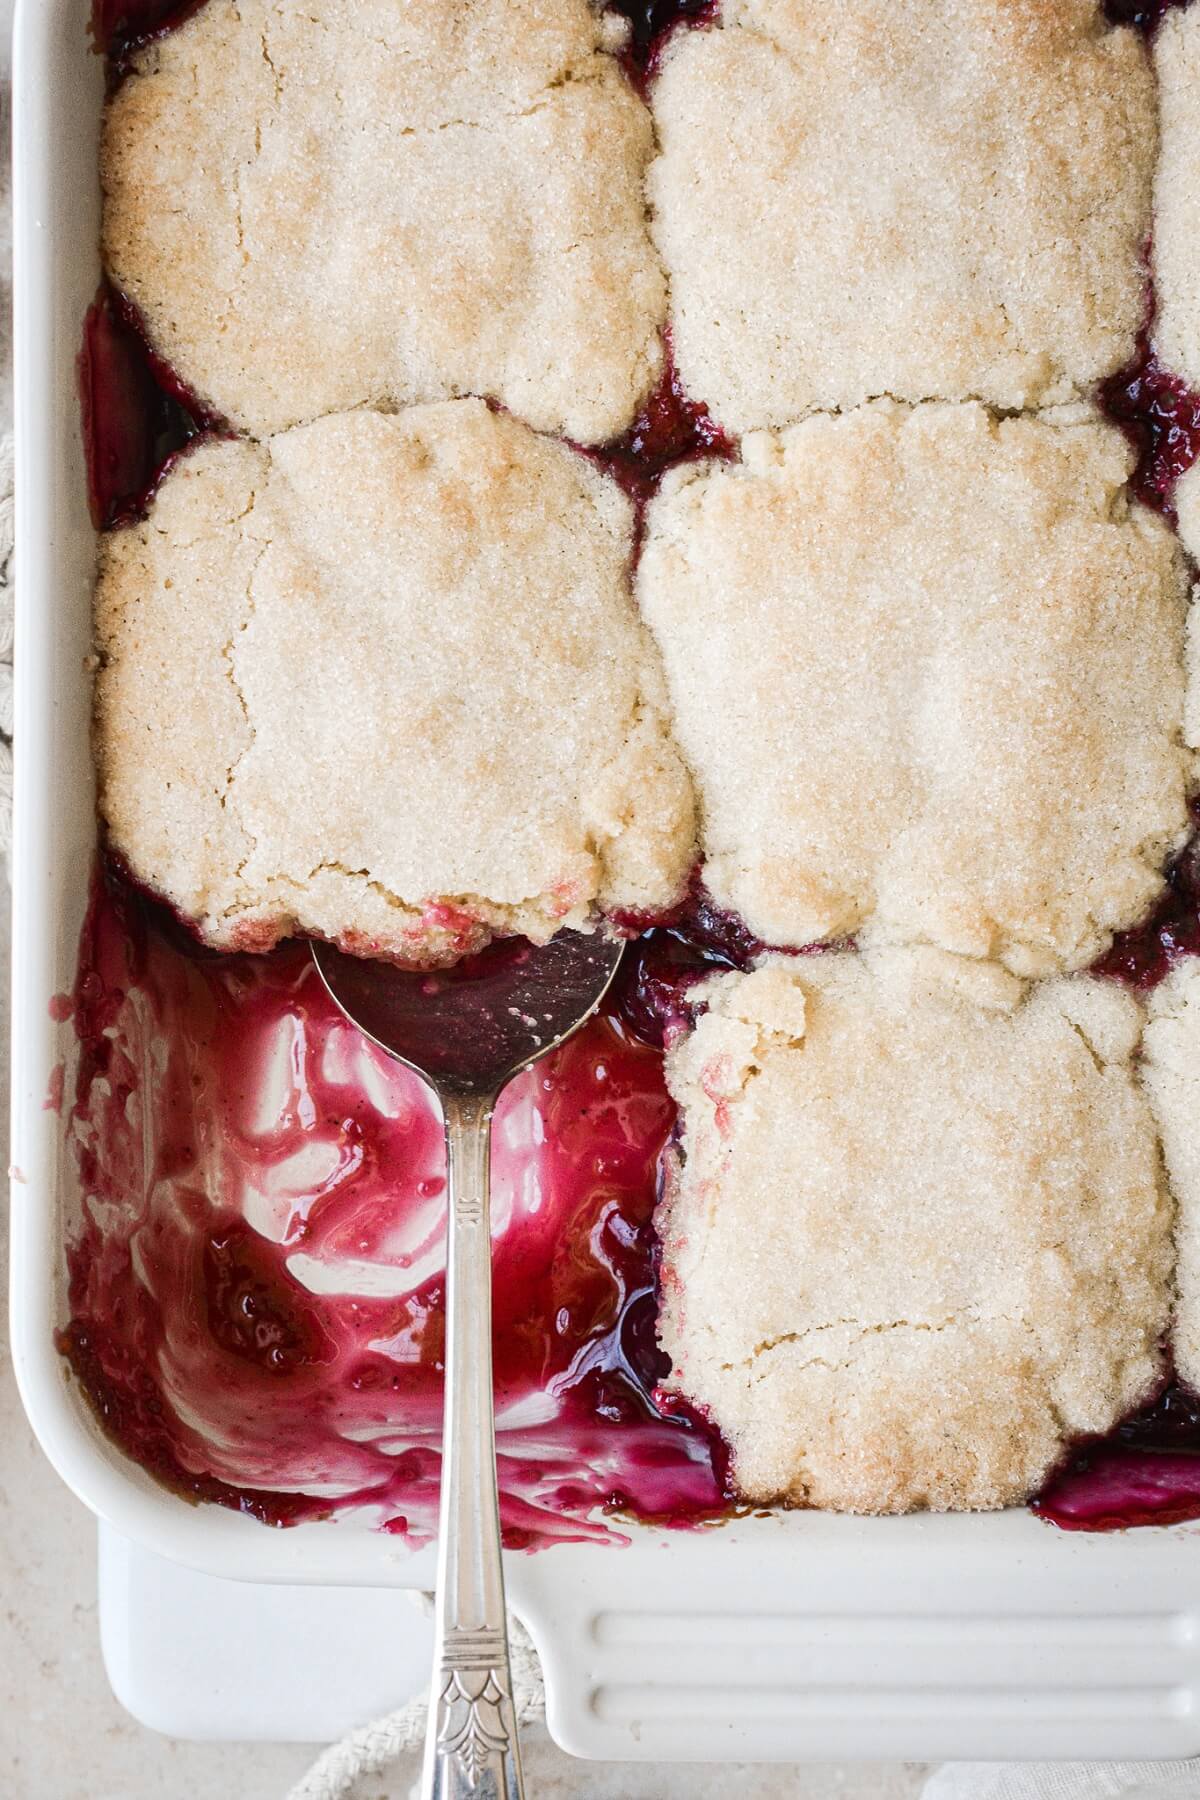 Cherry cobbler in a dish, with one serving taken.